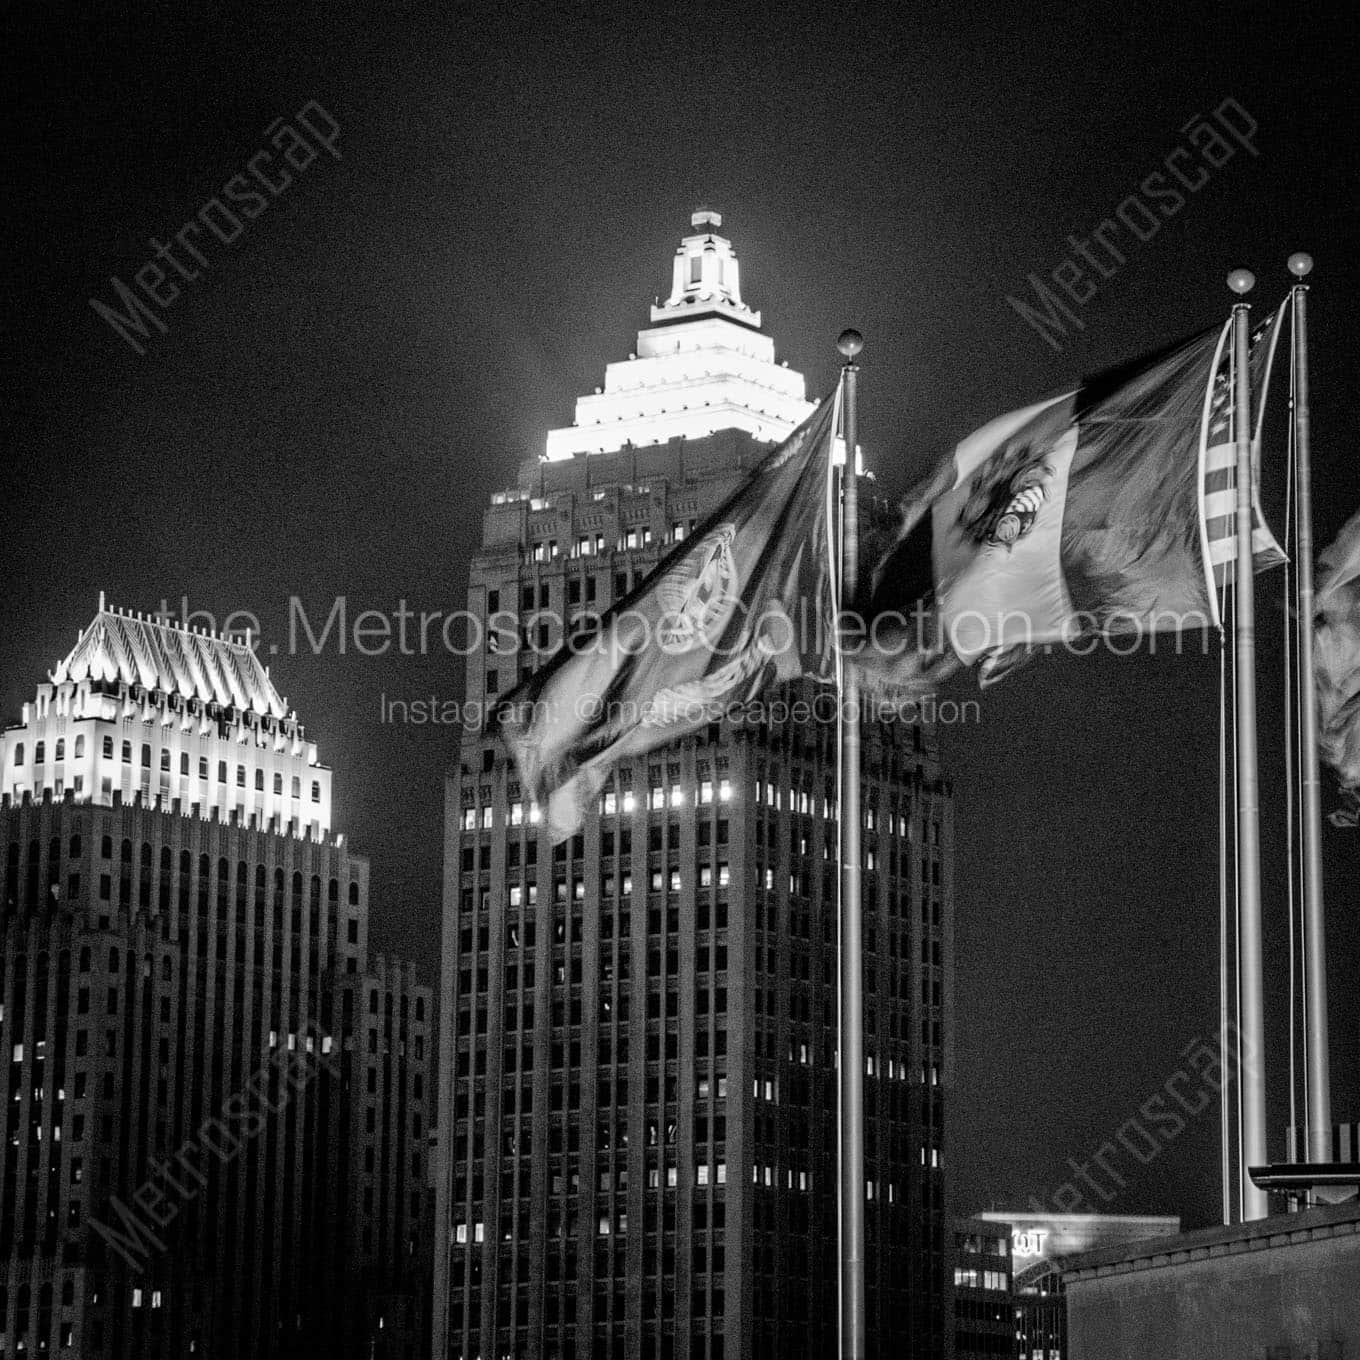 pittsburgh city allegheny county flags at night Black & White Office Art